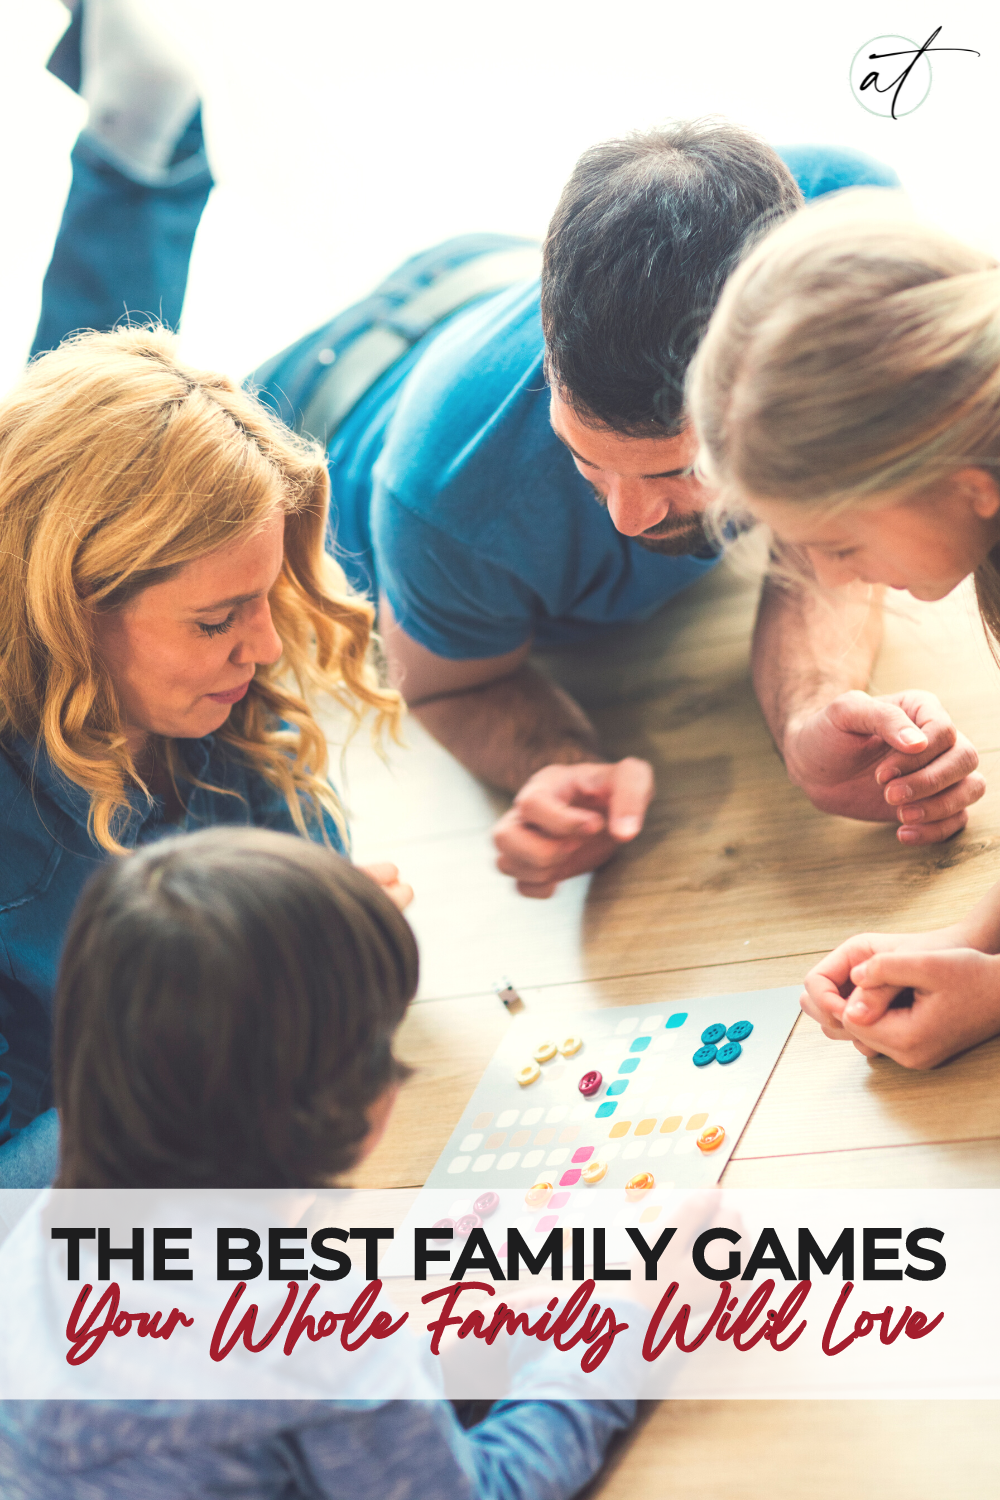 Family of four laying on the ground playing a family game and having a great time